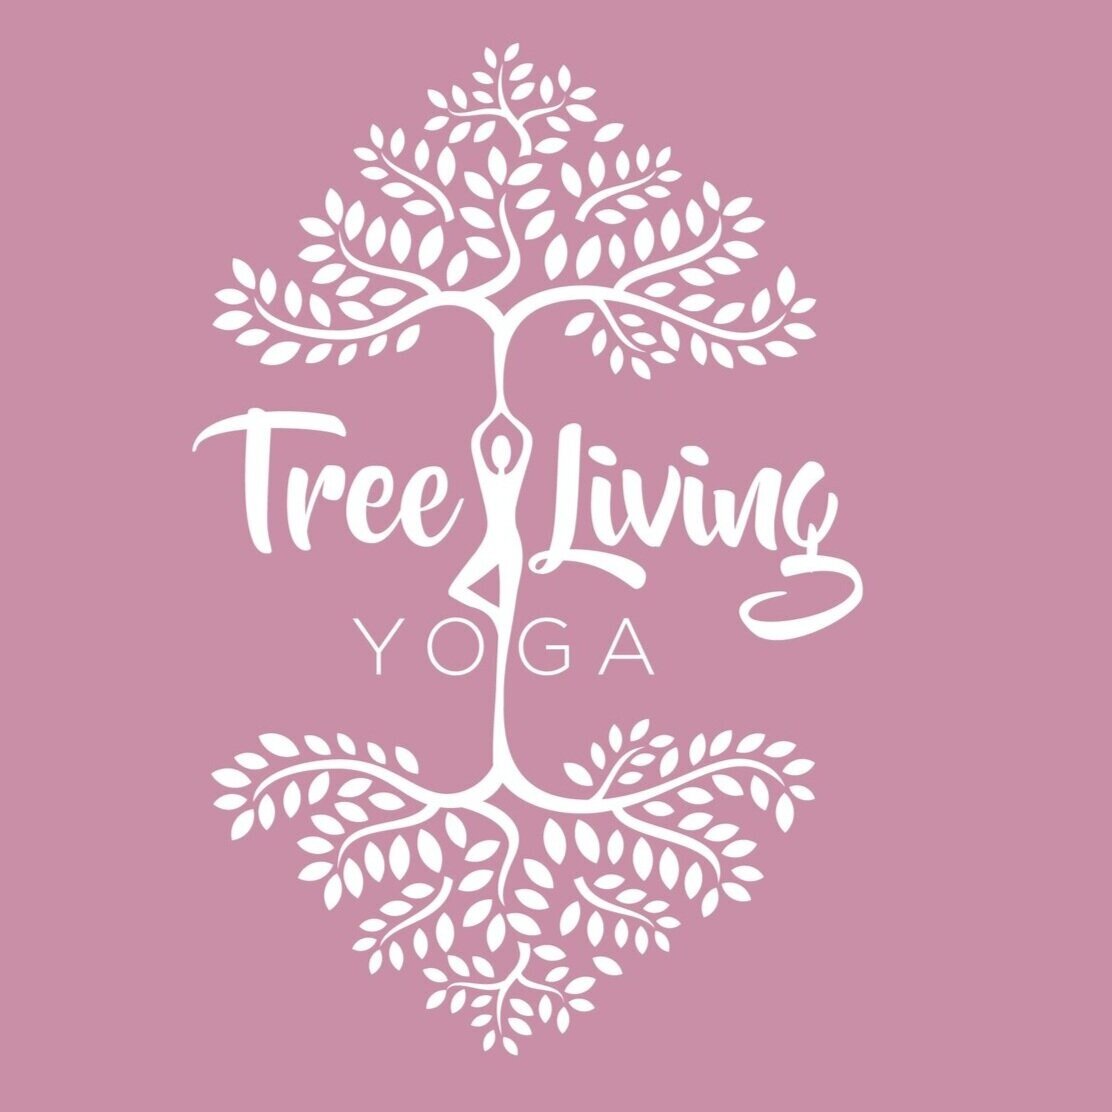 Tree+Living+Yoga+Logo+FINAL-+PINK-White+out